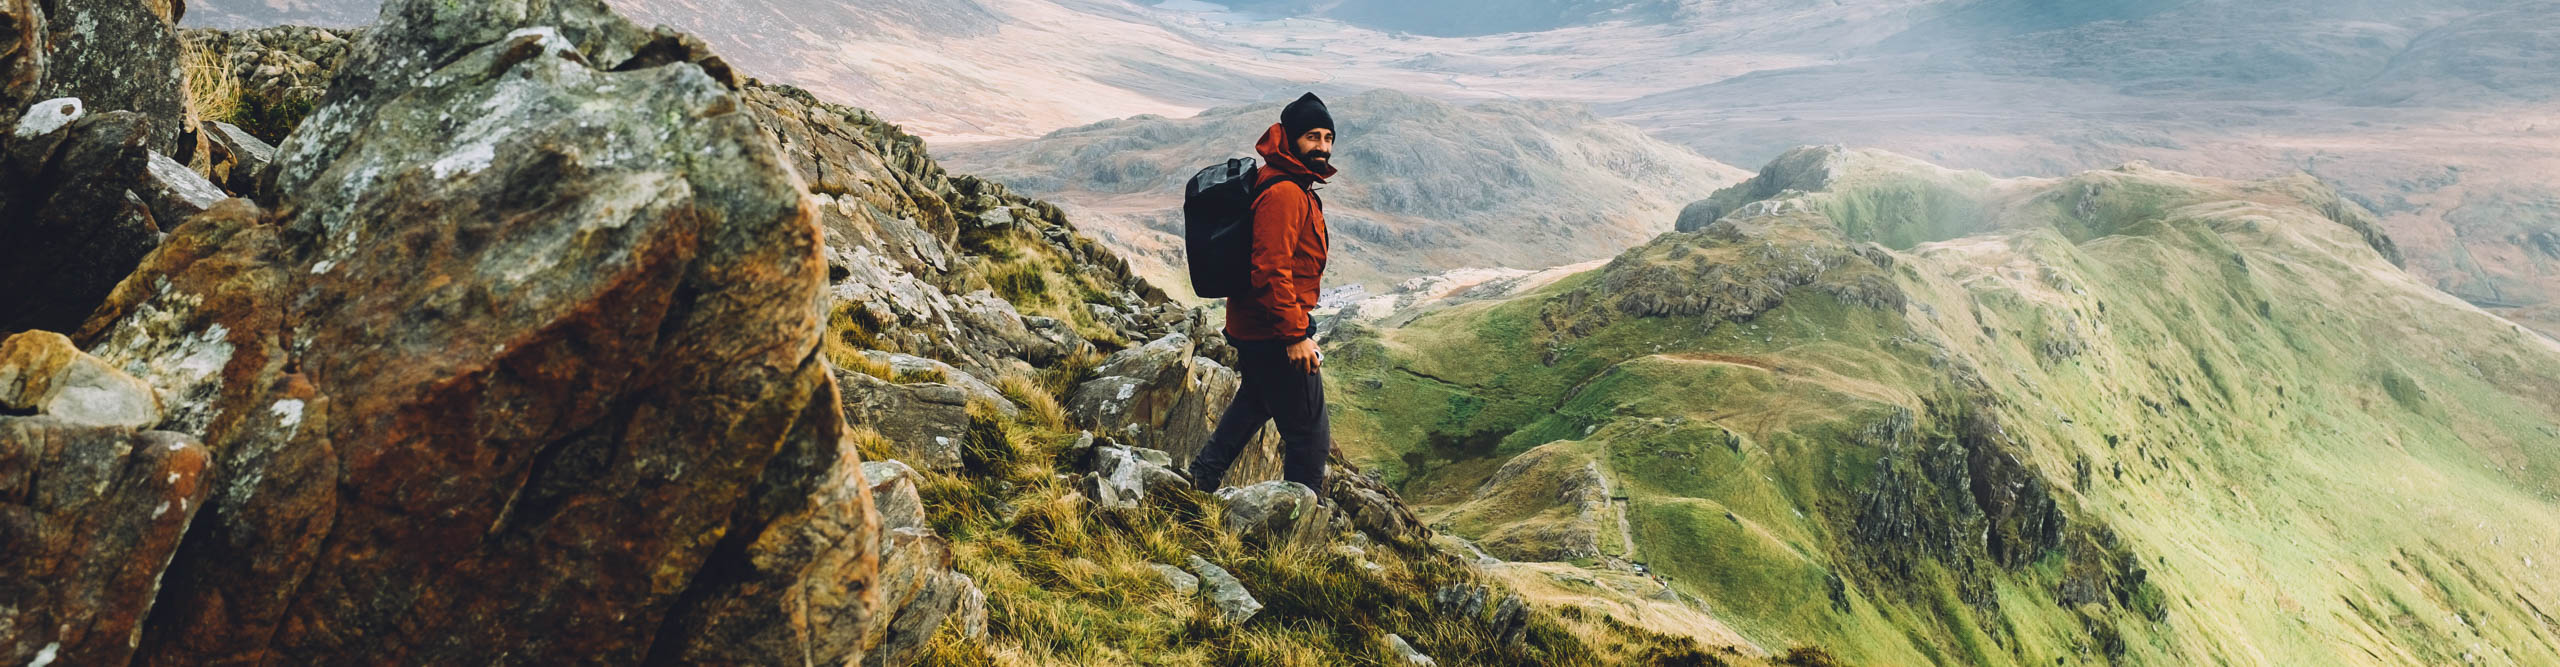 Man in red jacket hiking down the mountain in Snowdonia National Park, Wales, United Kingdom